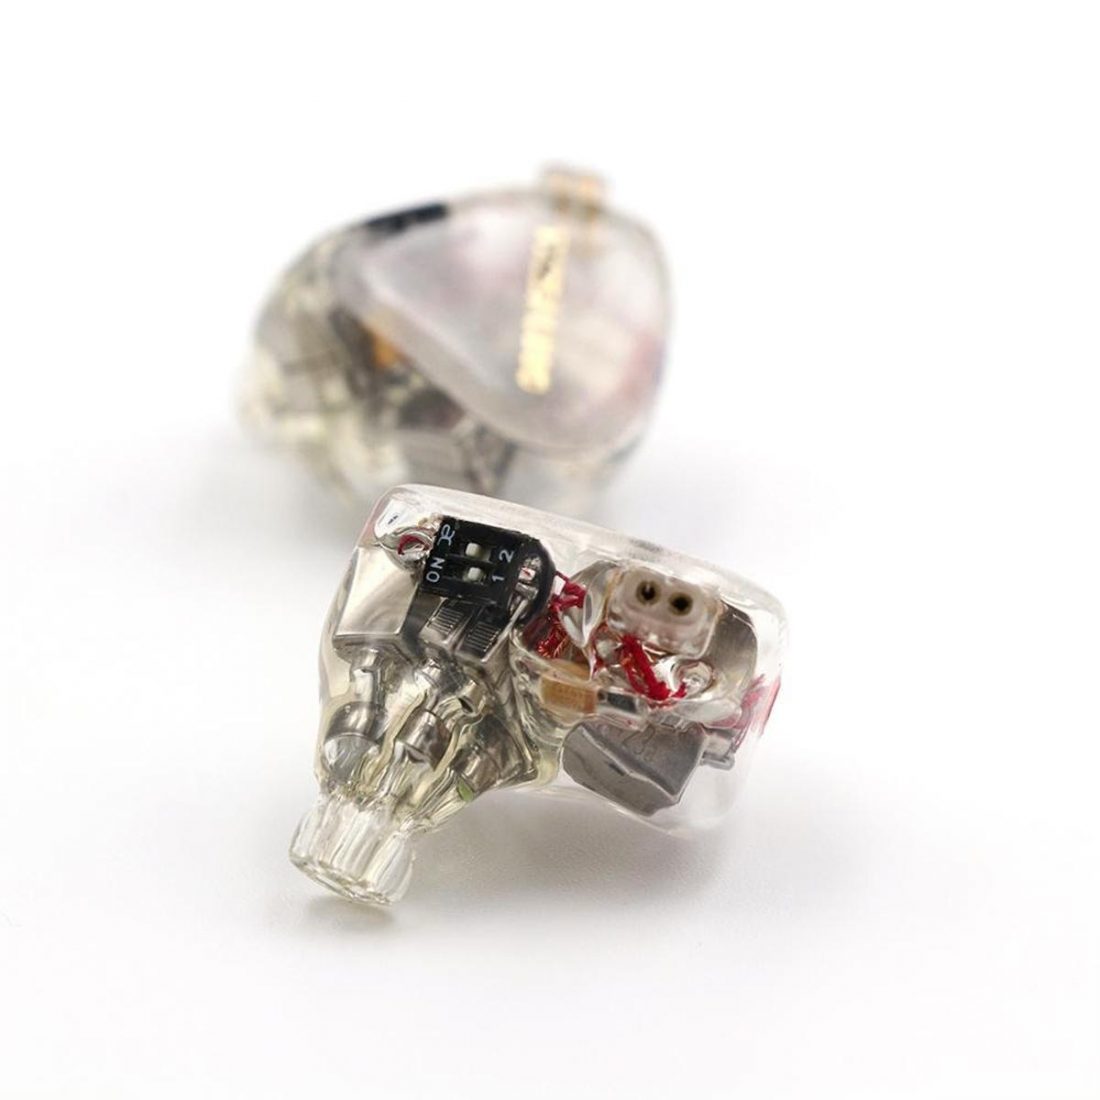 The Thieaudio Voyager 14 IEMs. (From linsoul.com)